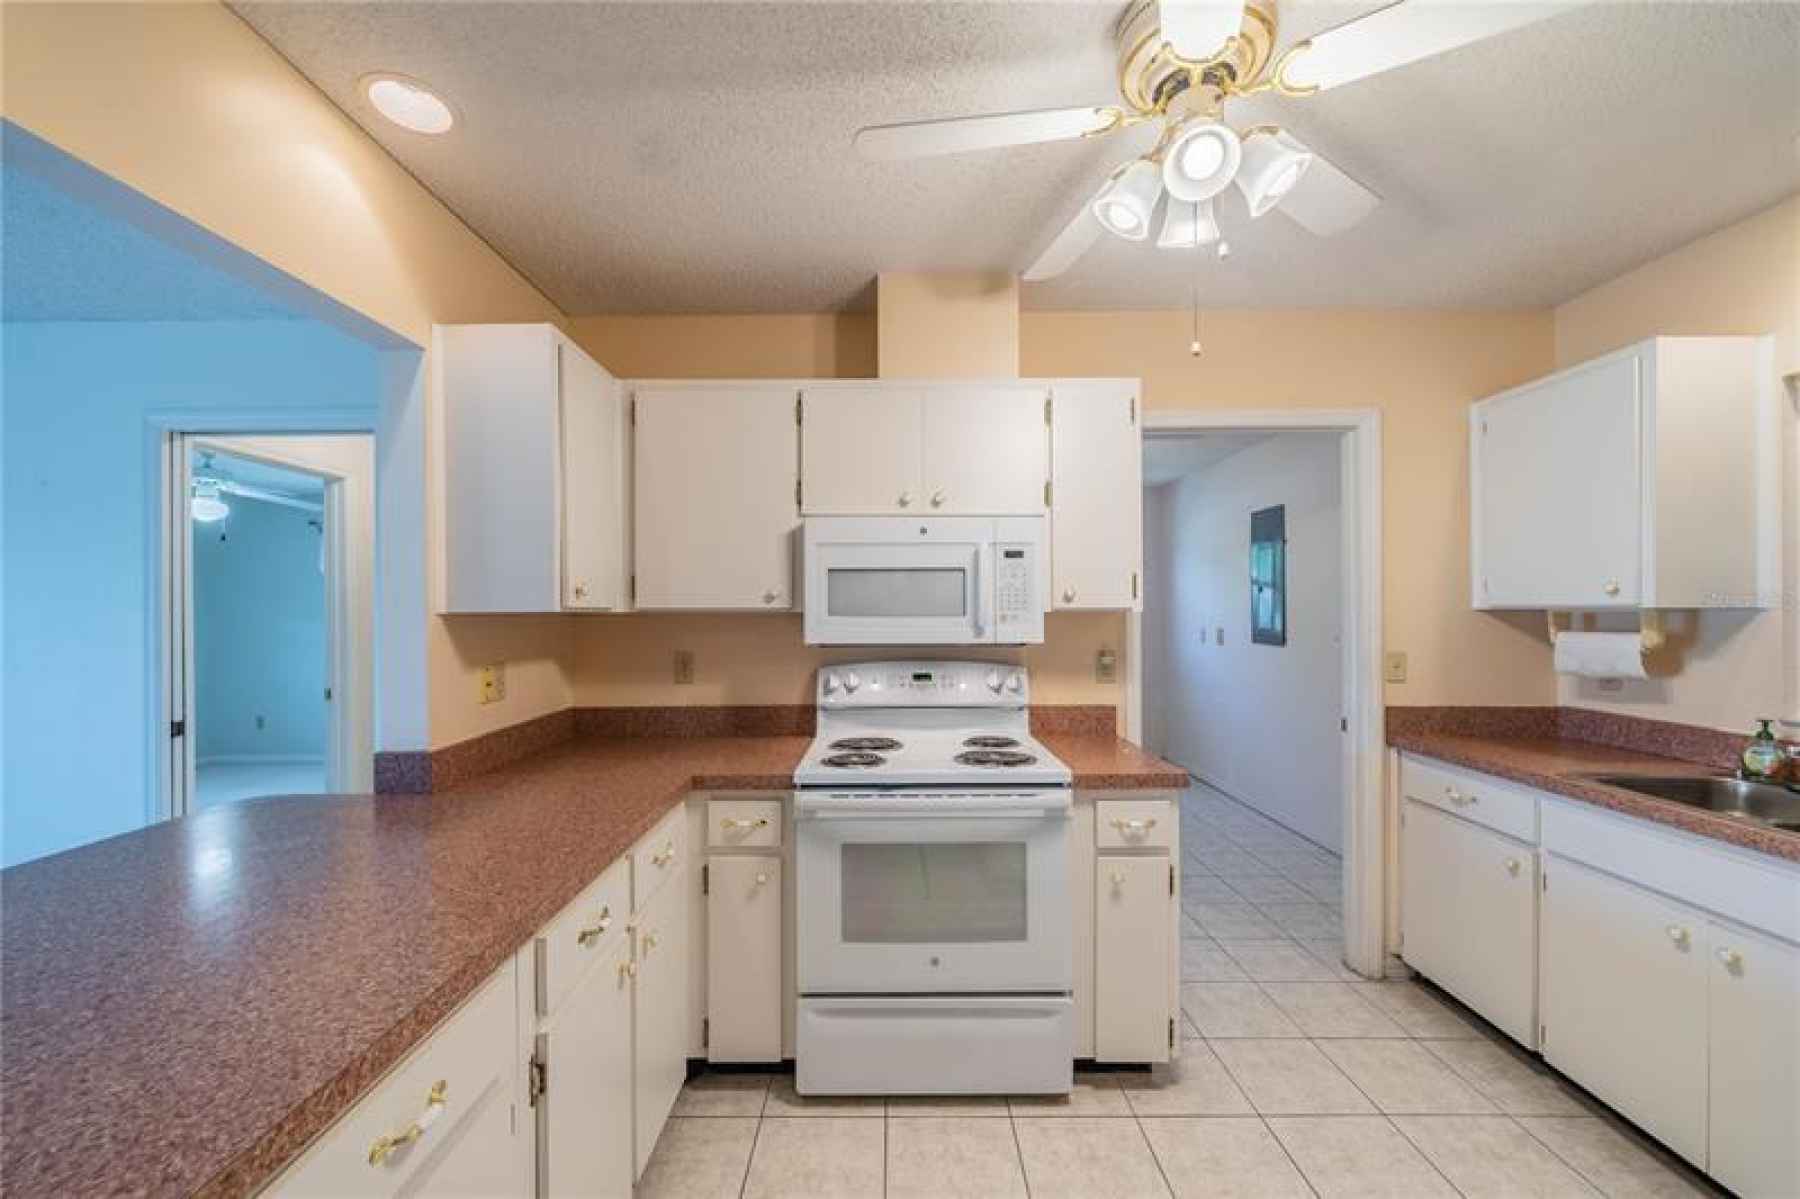 Spacious Kitchen with ample counter space